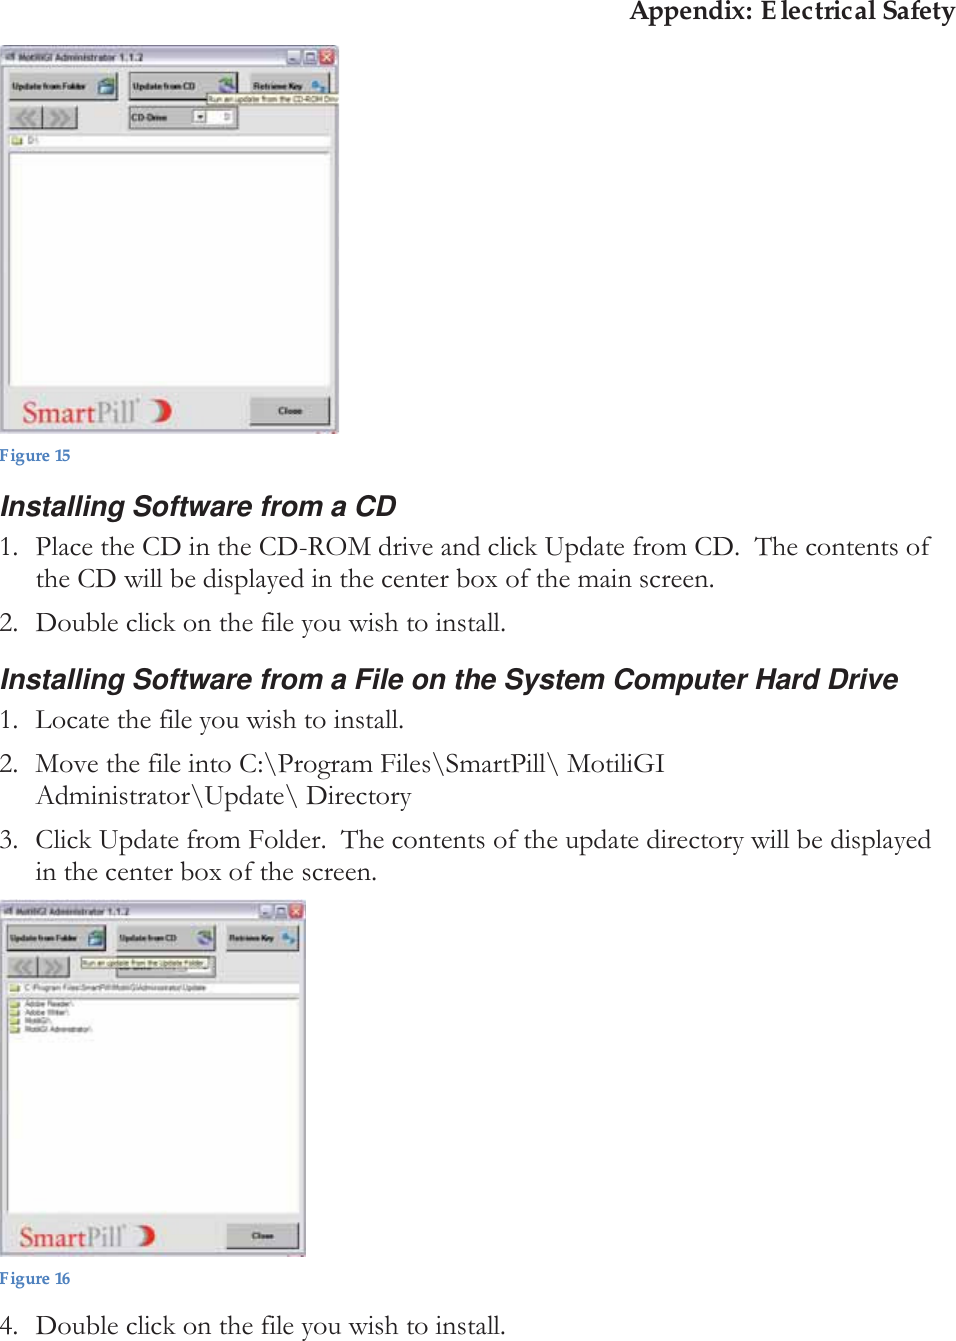 Appendix: Electrical Safety  Figure 15 Installing Software from a CD 1. Place the CD in the CD-ROM drive and click Update from CD.  The contents of the CD will be displayed in the center box of the main screen. 2. Double click on the file you wish to install.  Installing Software from a File on the System Computer Hard Drive 1. Locate the file you wish to install.  2. Move the file into C:\Program Files\SmartPill\ MotiliGI Administrator\Update\ Directory 3. Click Update from Folder.  The contents of the update directory will be displayed in the center box of the screen.  Figure 16 4. Double click on the file you wish to install. 